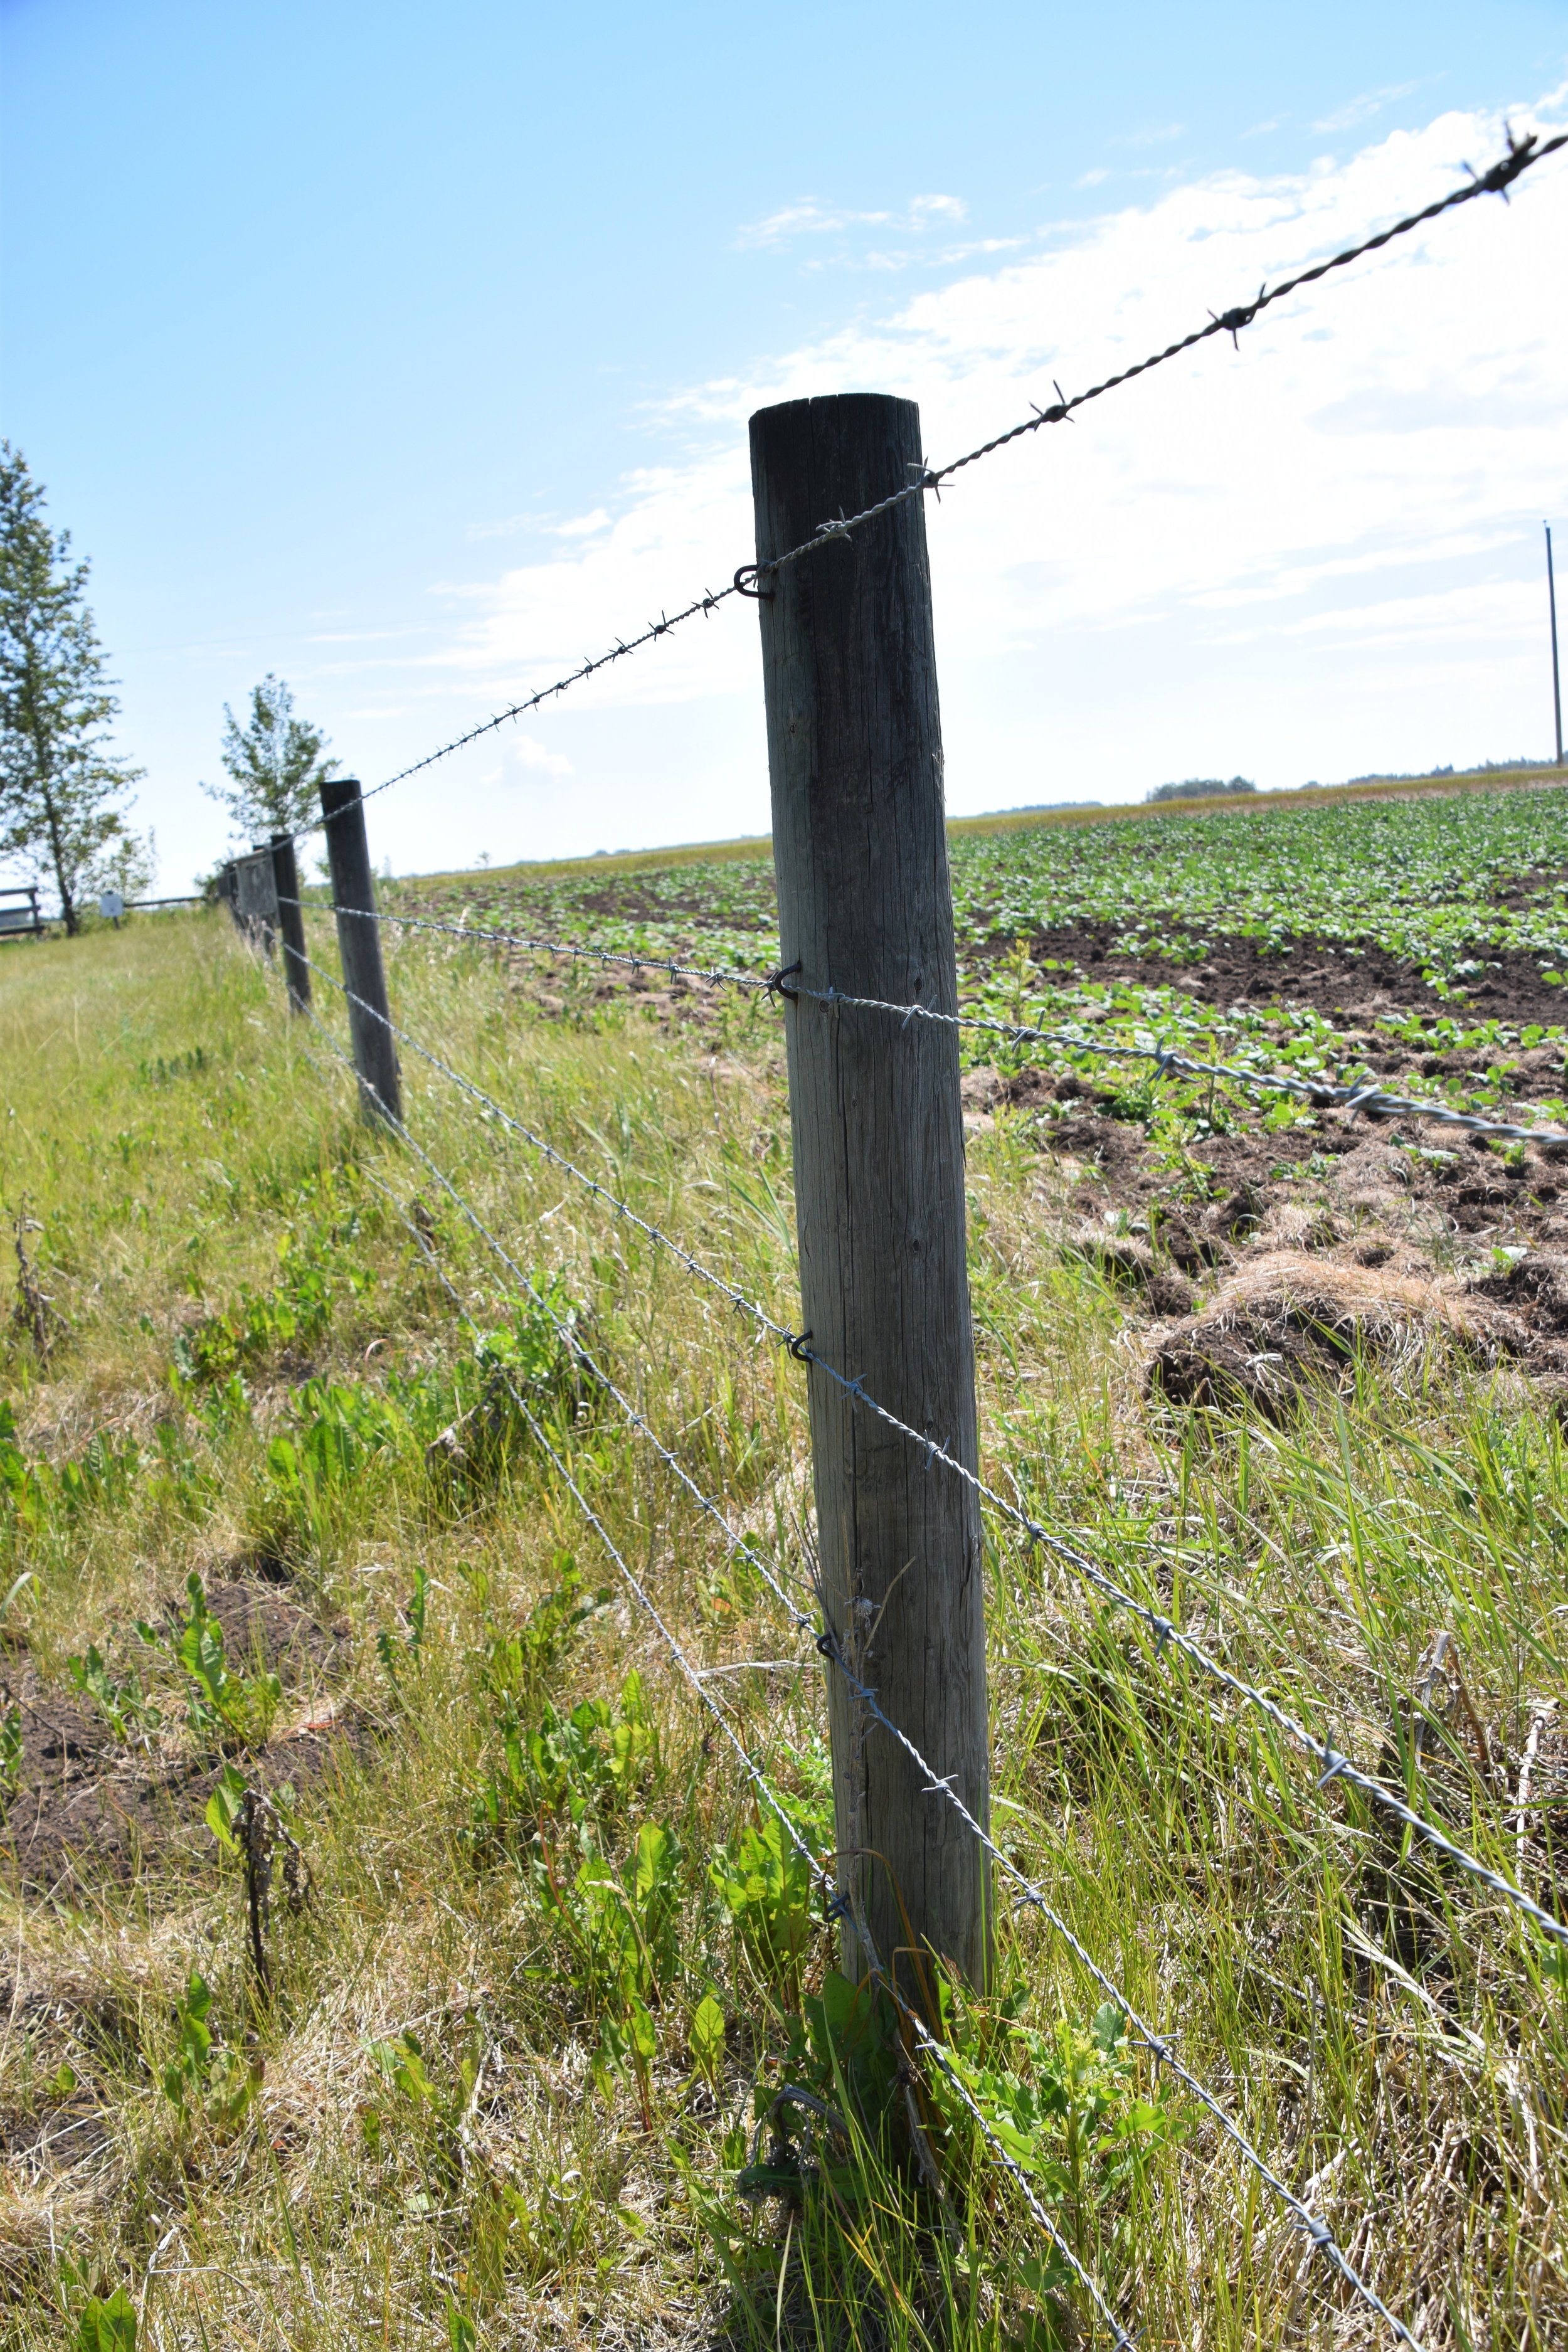 This five-strand barbed wire fence poses a hazard to wildlife.